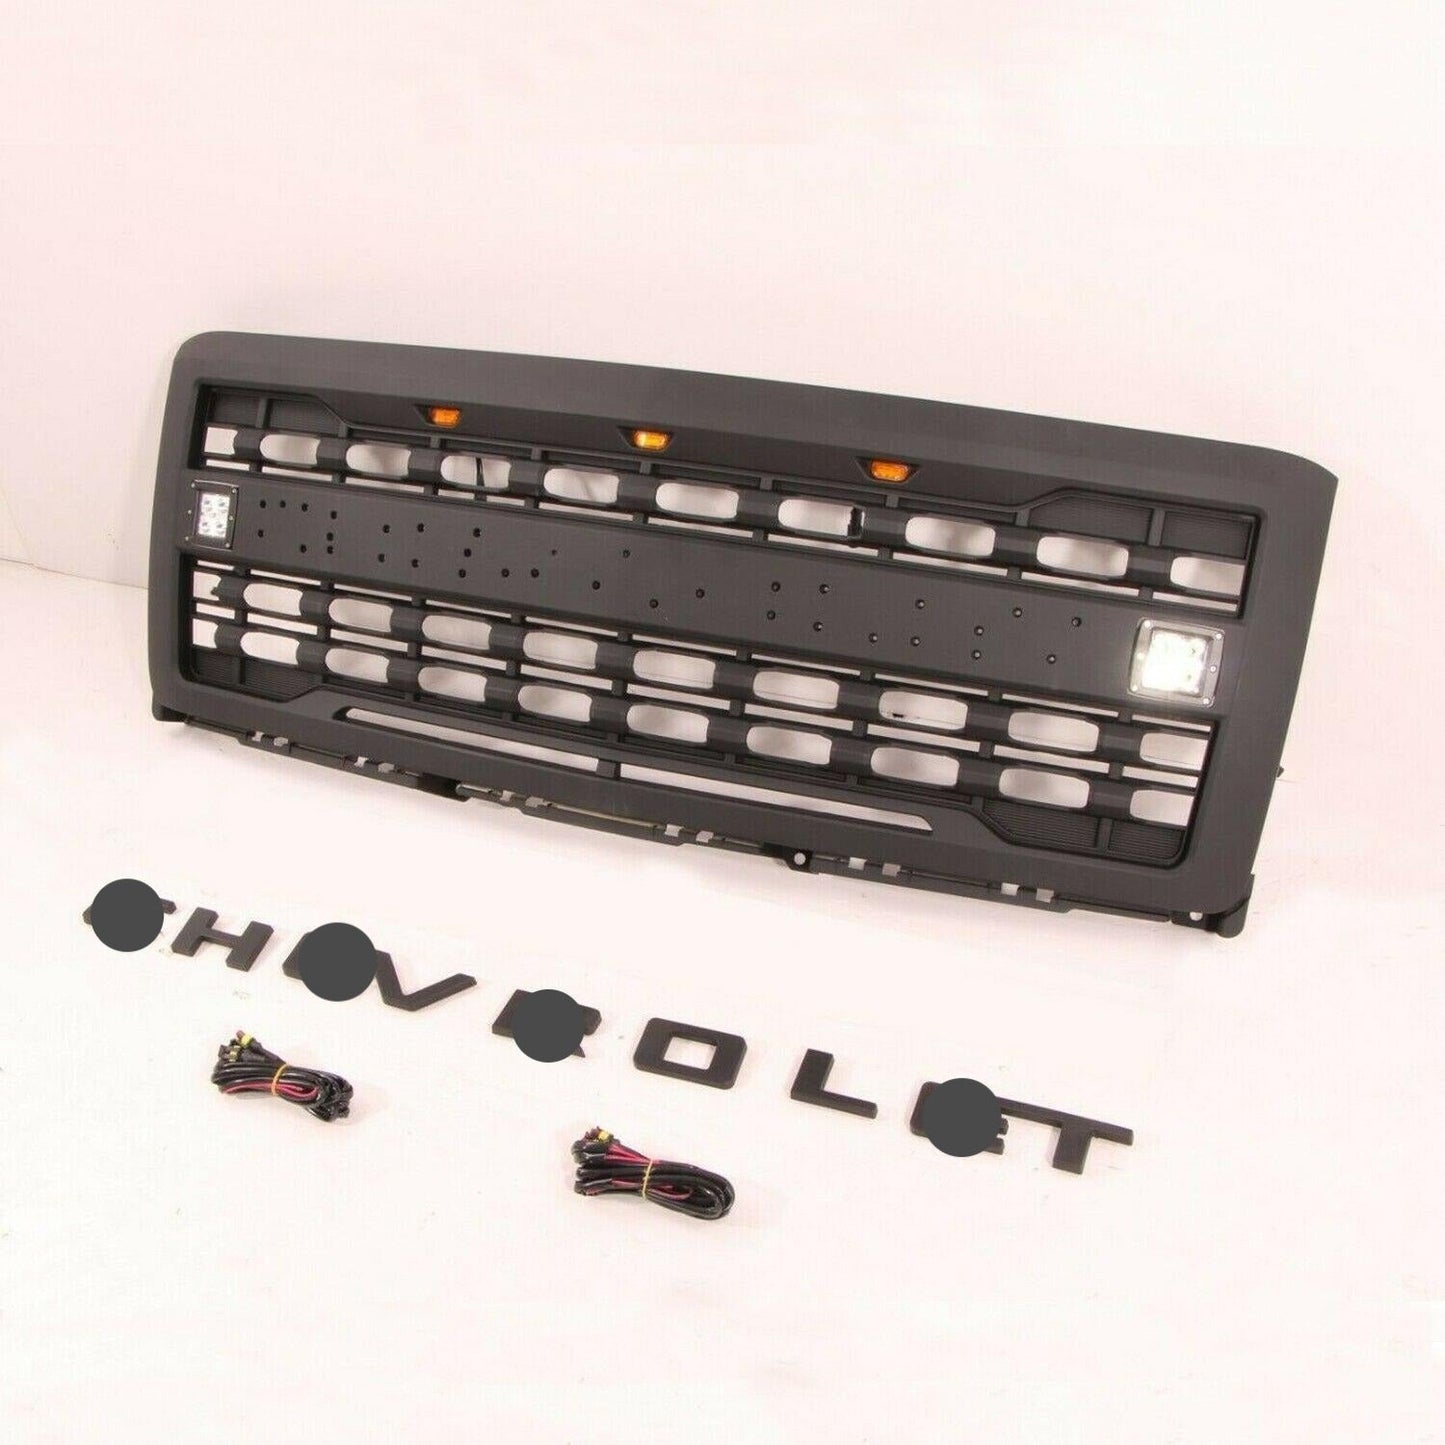 Goodmatchup Raptor Style Black Grill For 2014 2015 Chevy Silverado 1500 W/ Letters / 3+2 LED Lights - Goodmatchup